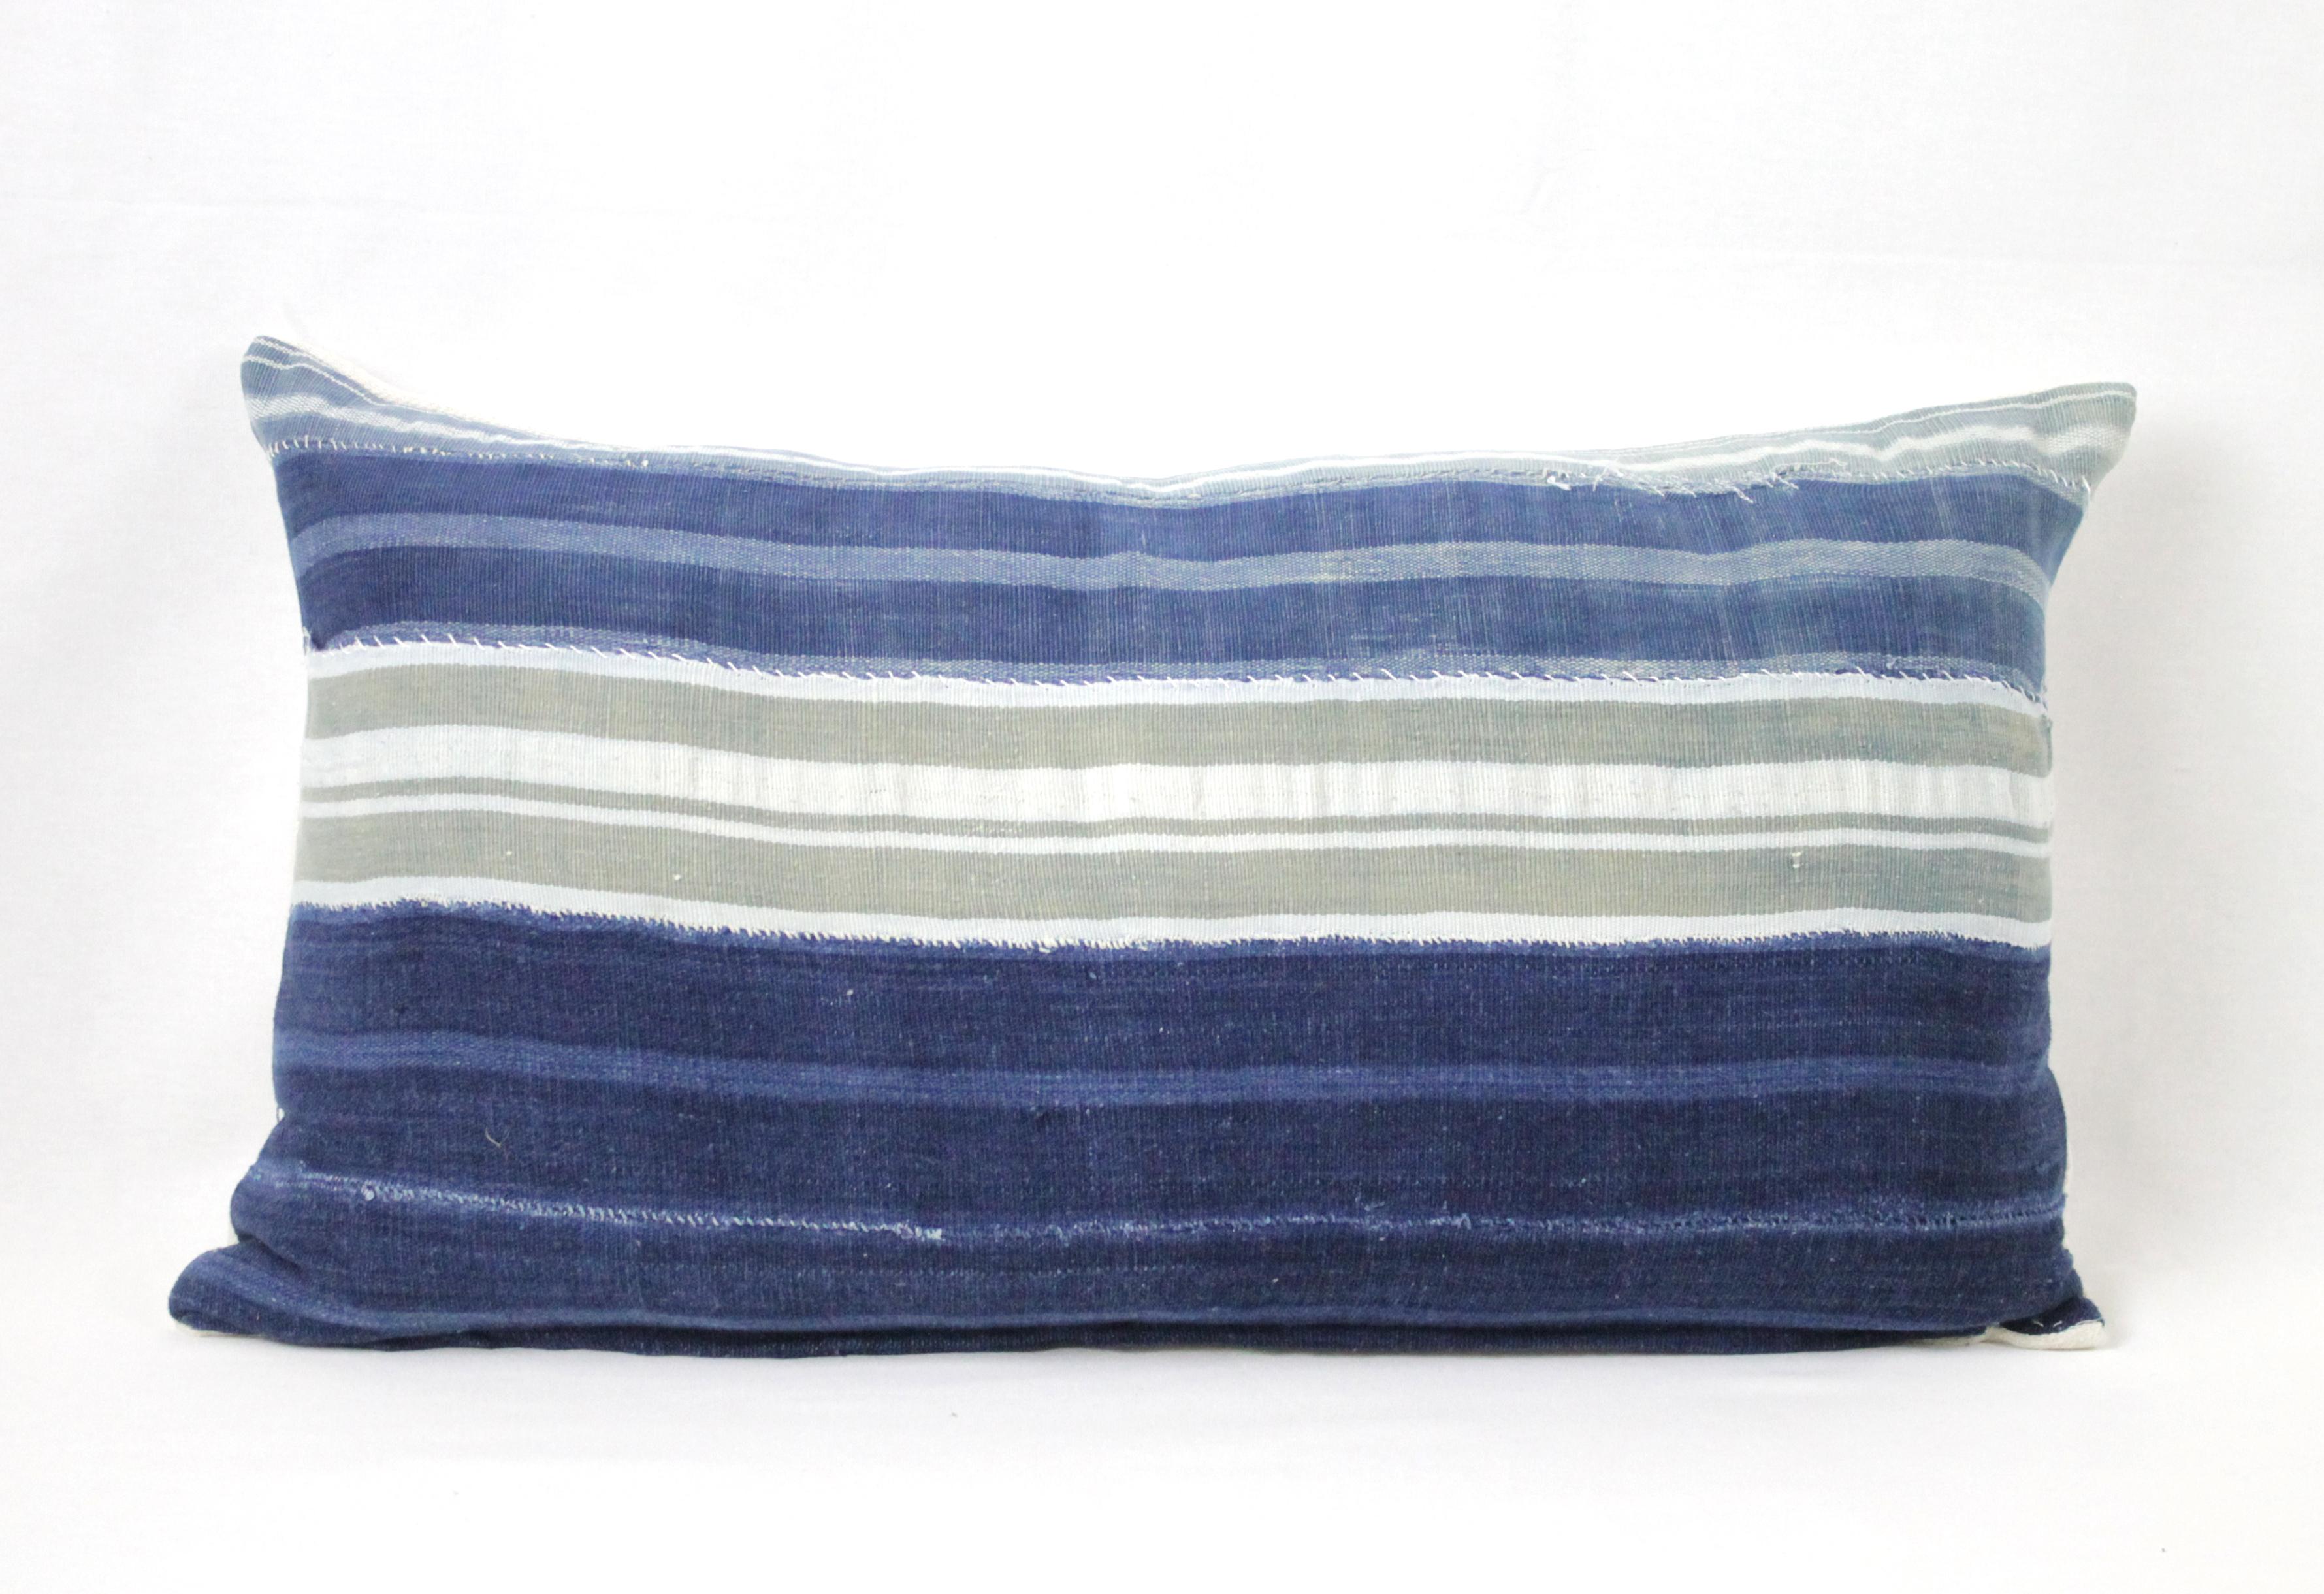 Vintage batik indigo blue, tan and grey or green batik style pillow, with zipper closure. Back is in a natural antique grain sack linen. Pillow has horizontal stripes with exposed seams. Main colors are indigo blue, light blue, tan, and grey or